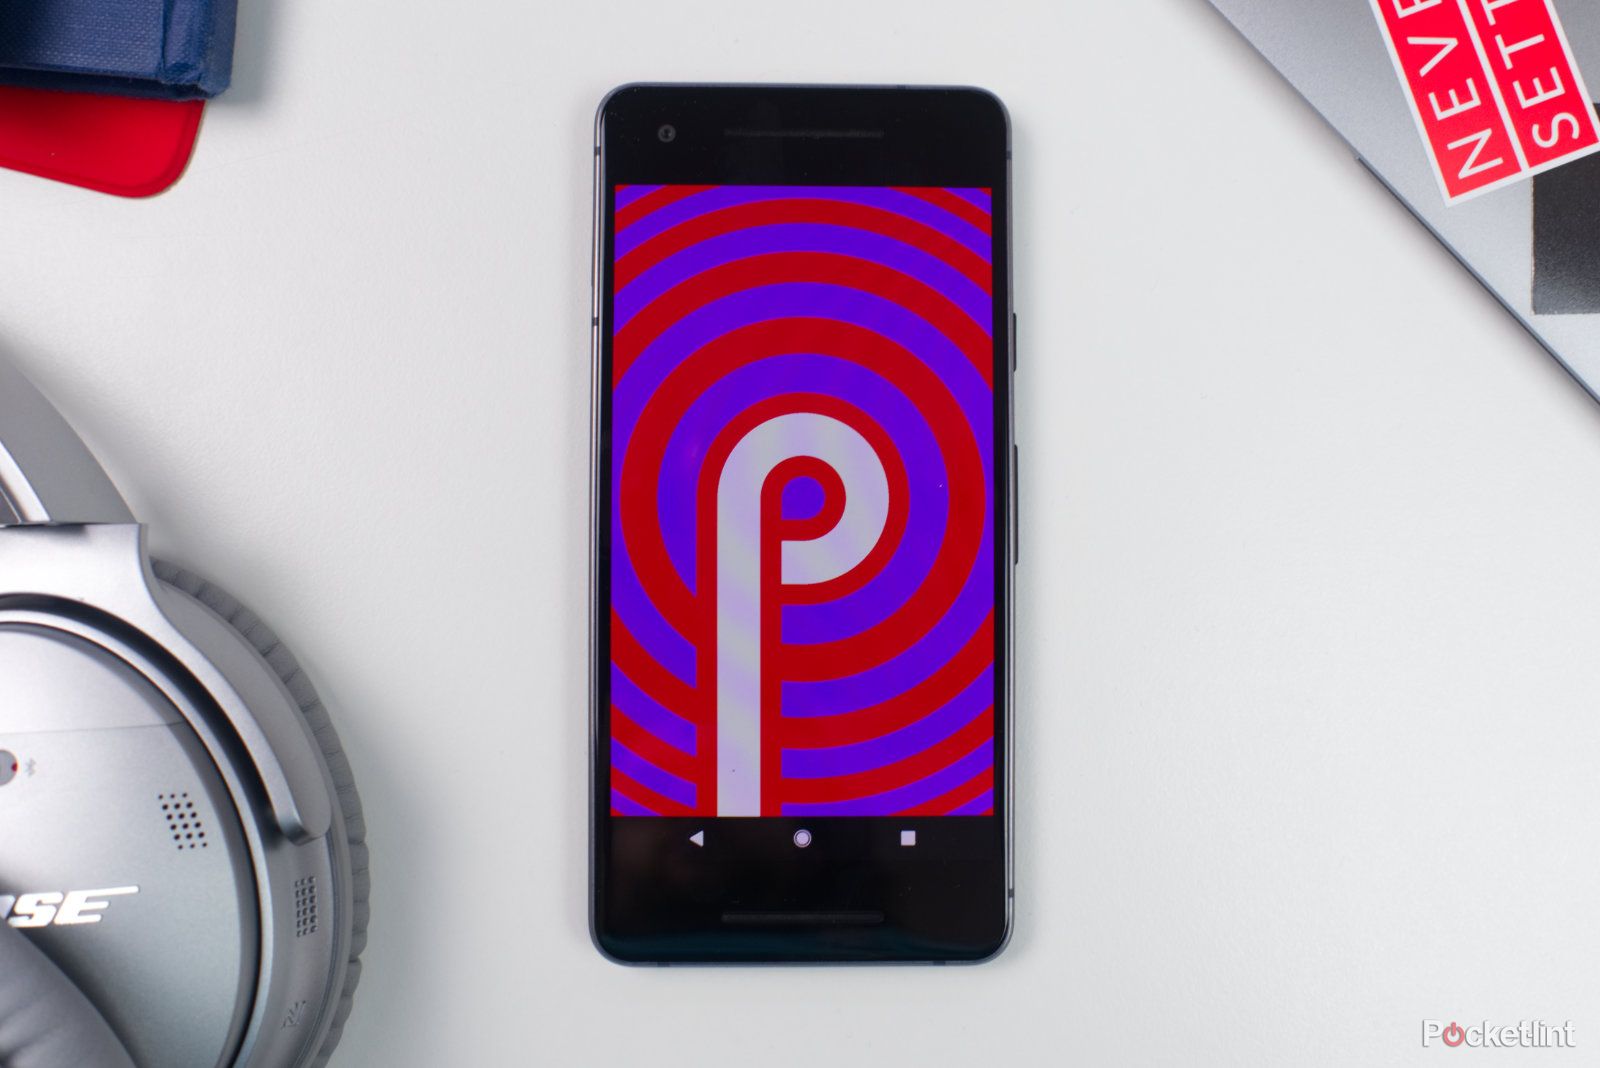 Android P release date could have just been confirmed image 1